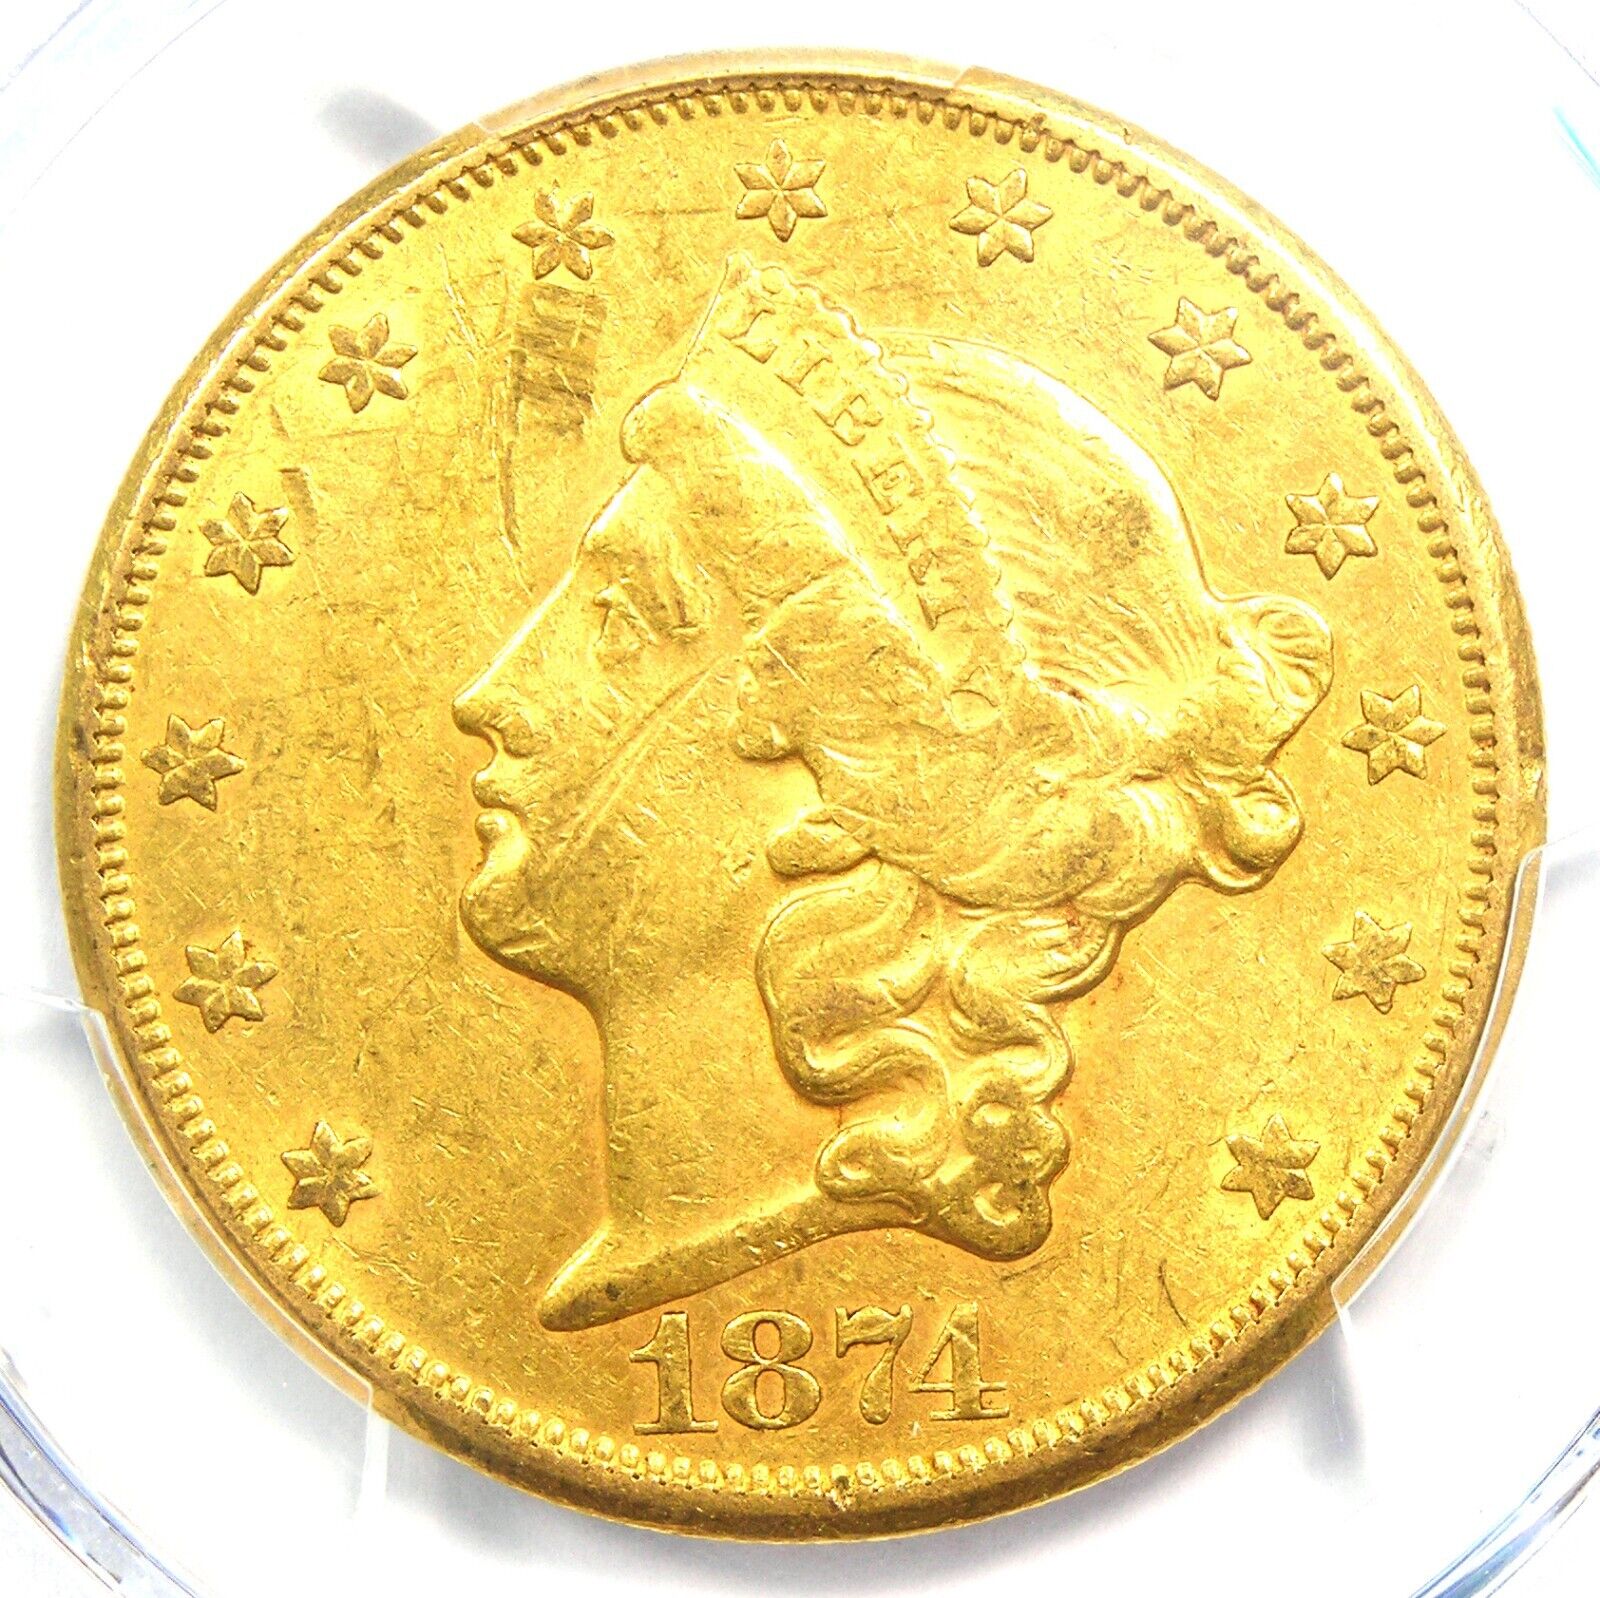 1874-CC Liberty Gold Double Eagle $20 Coin - PCGS Uncirculated Detail (UNC MS)